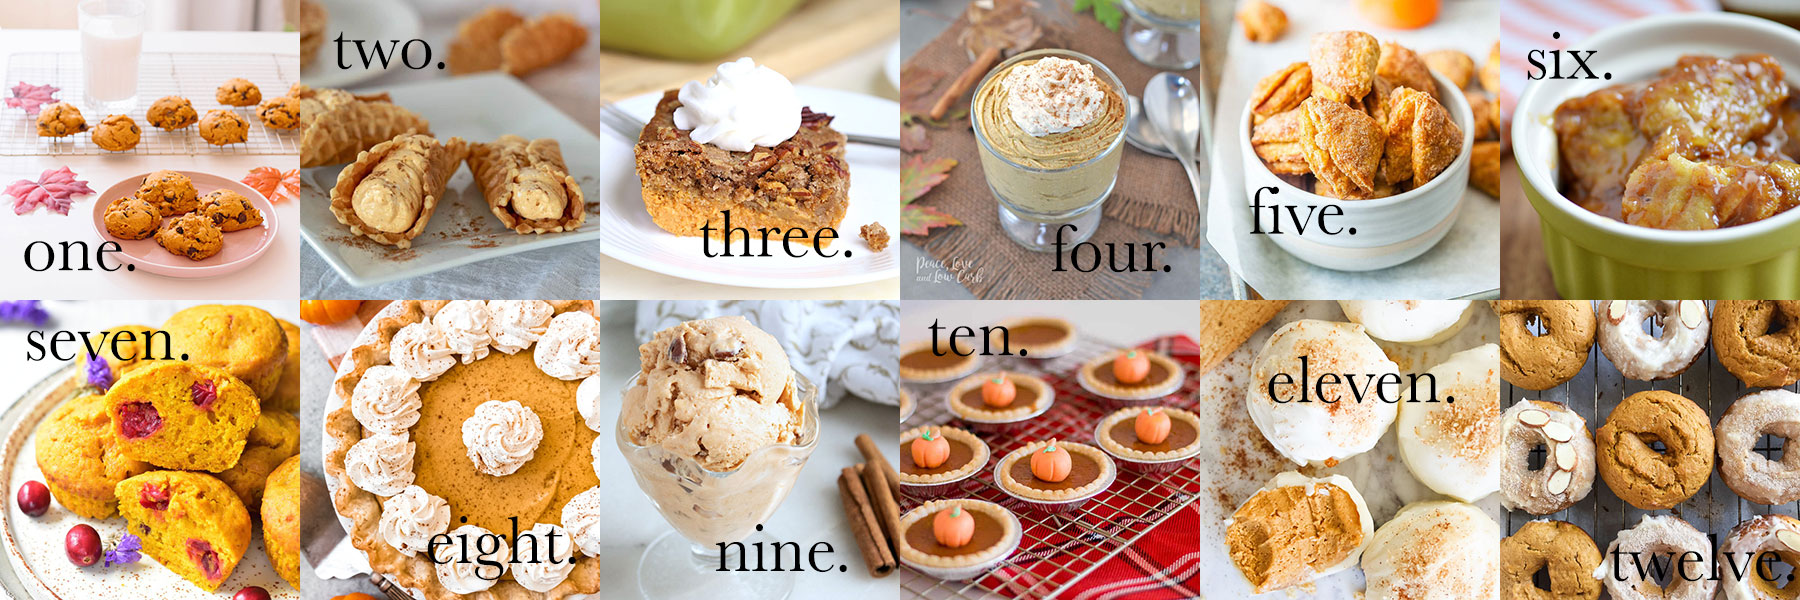 It's pumpkin season! Today, I rounded up some of the best pumpkin desserts out there - and they're waiting to be baked. So grab your aprons, reach for a whisk... we've got some baking to do! #pumpkindesserts